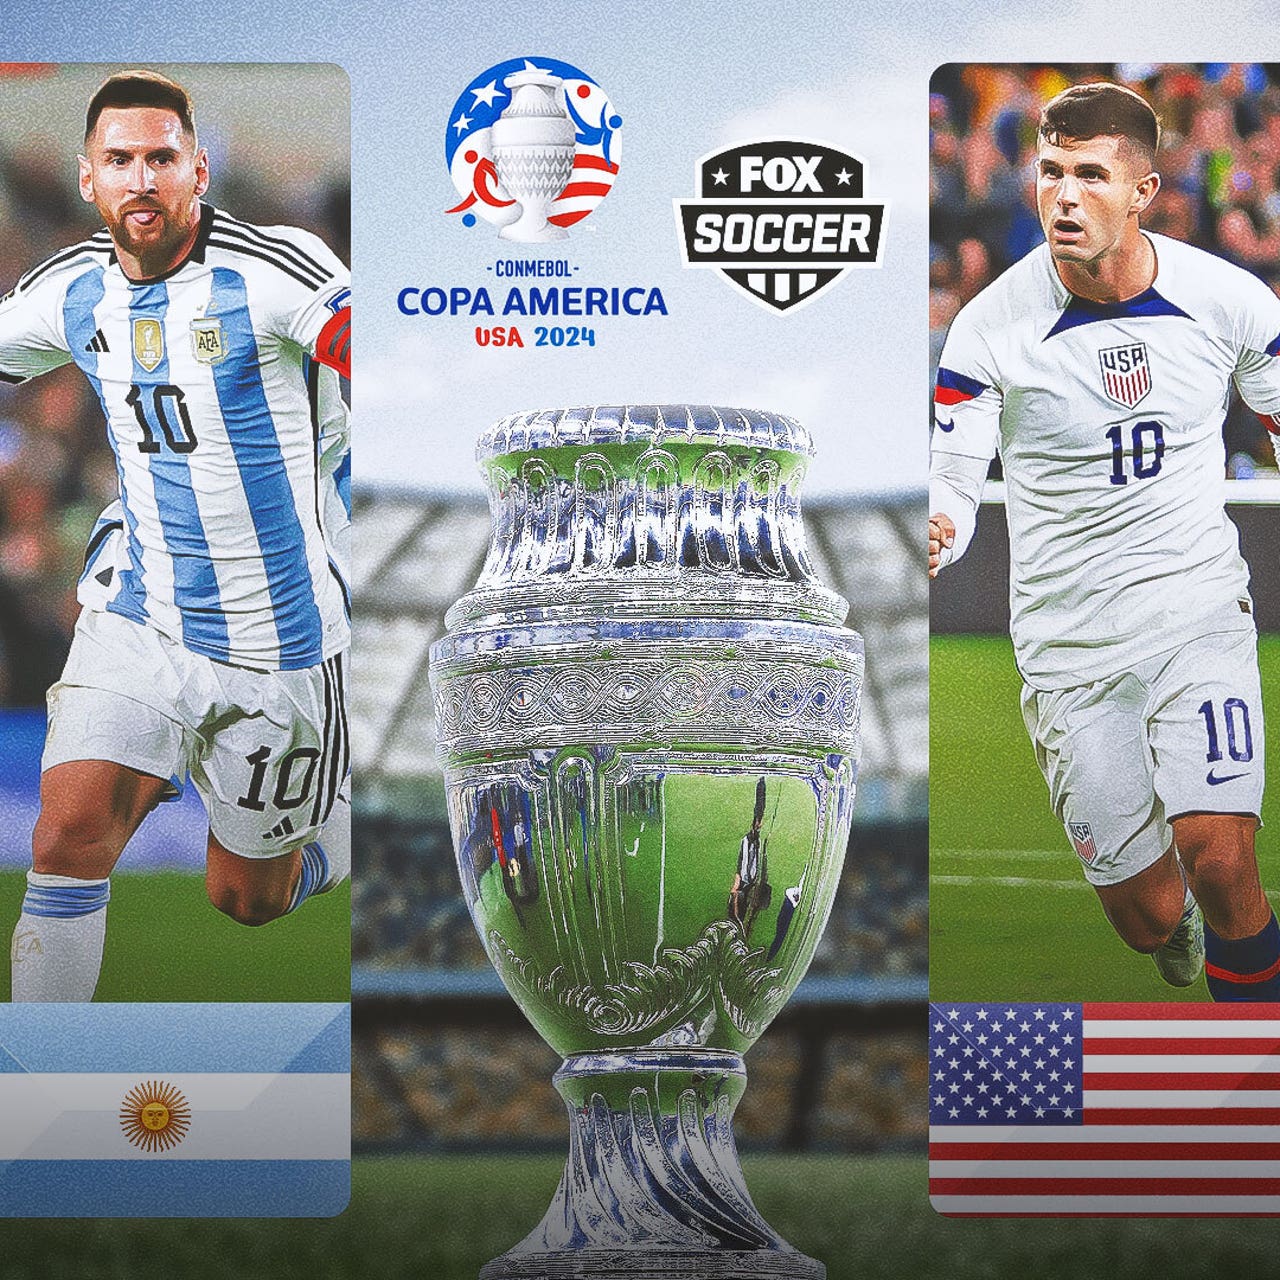 Stadiums - 2024 USA Copa America and 2026 World Cup 